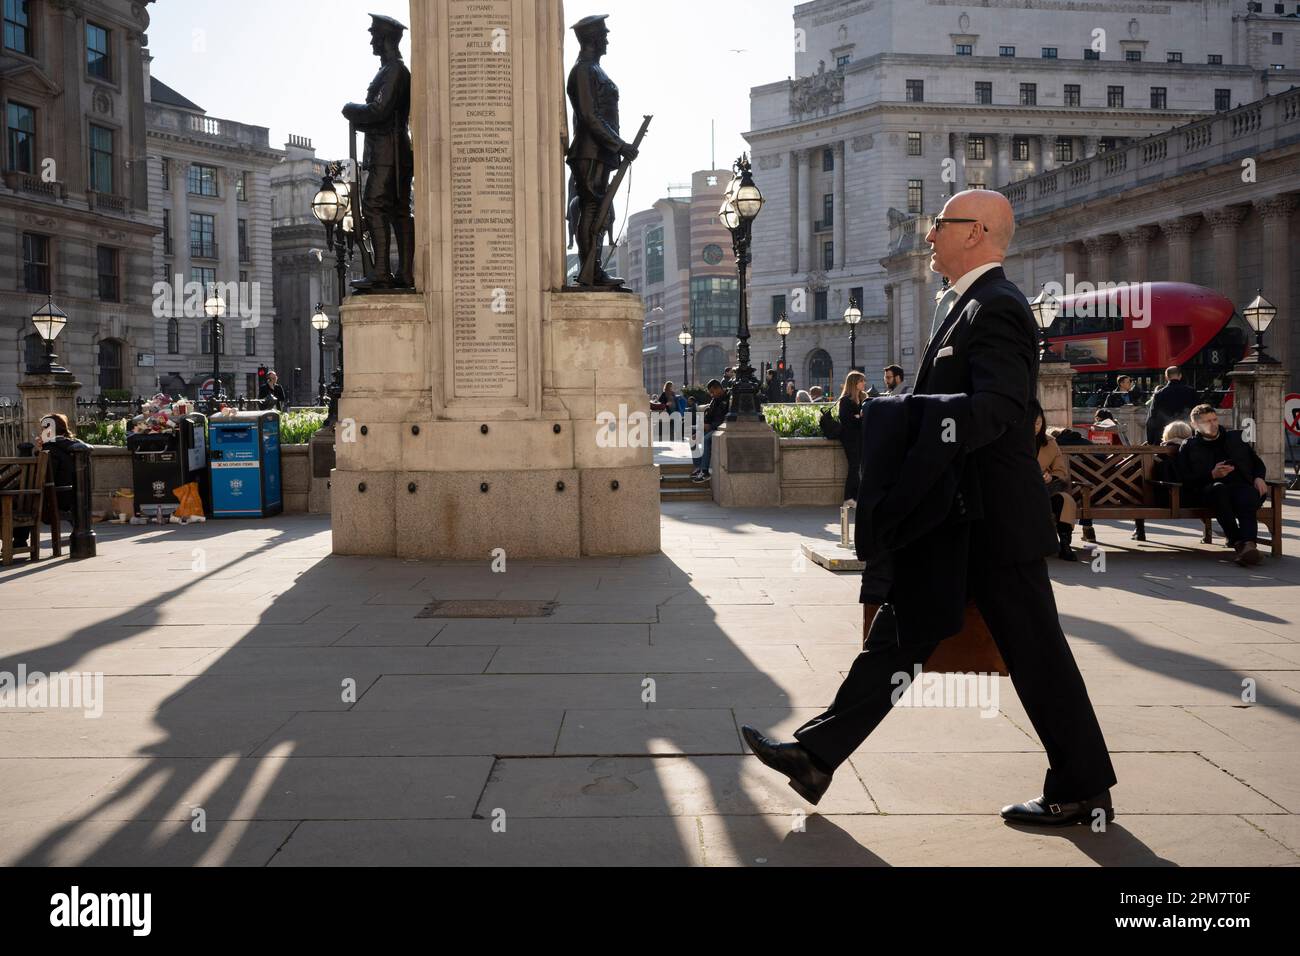 City workers and visitors to London walk past the war memorial to those killed in the First World War, in the City of London, aka the Square Mile - the capital's financial district, on 4th April 2023, in London, England. Stock Photo